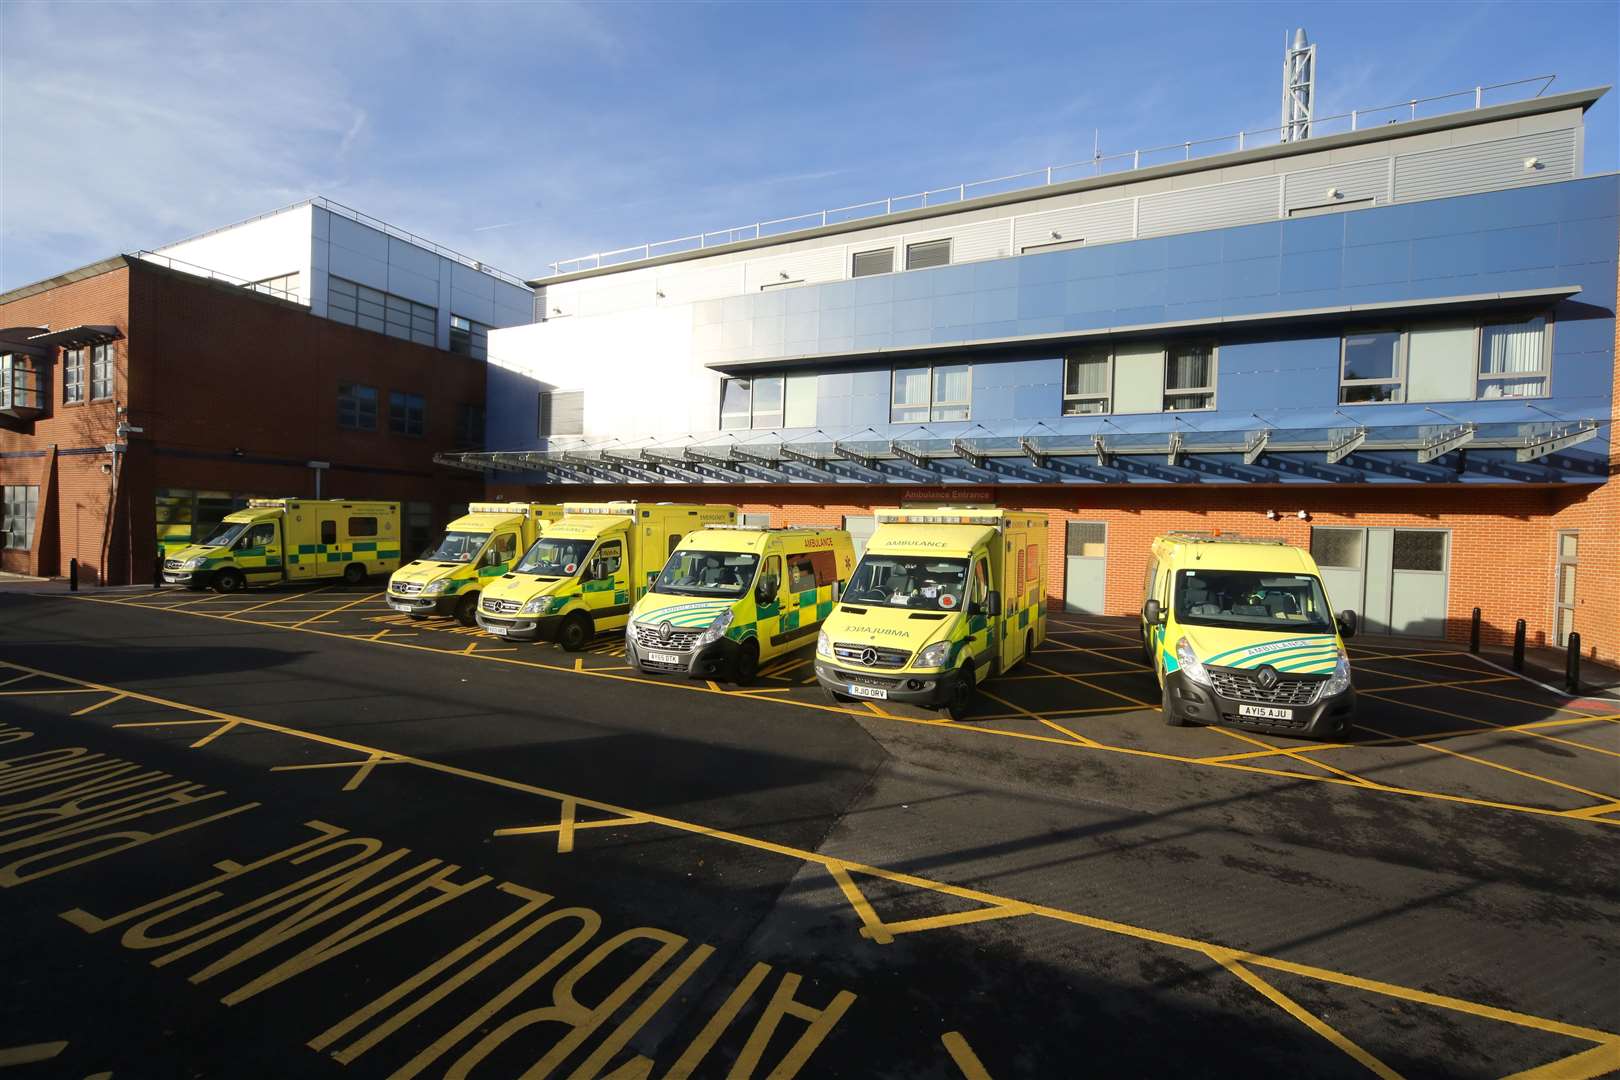 There will be another new leader of the Medway NHS Trust at Medway Maritime Hospital